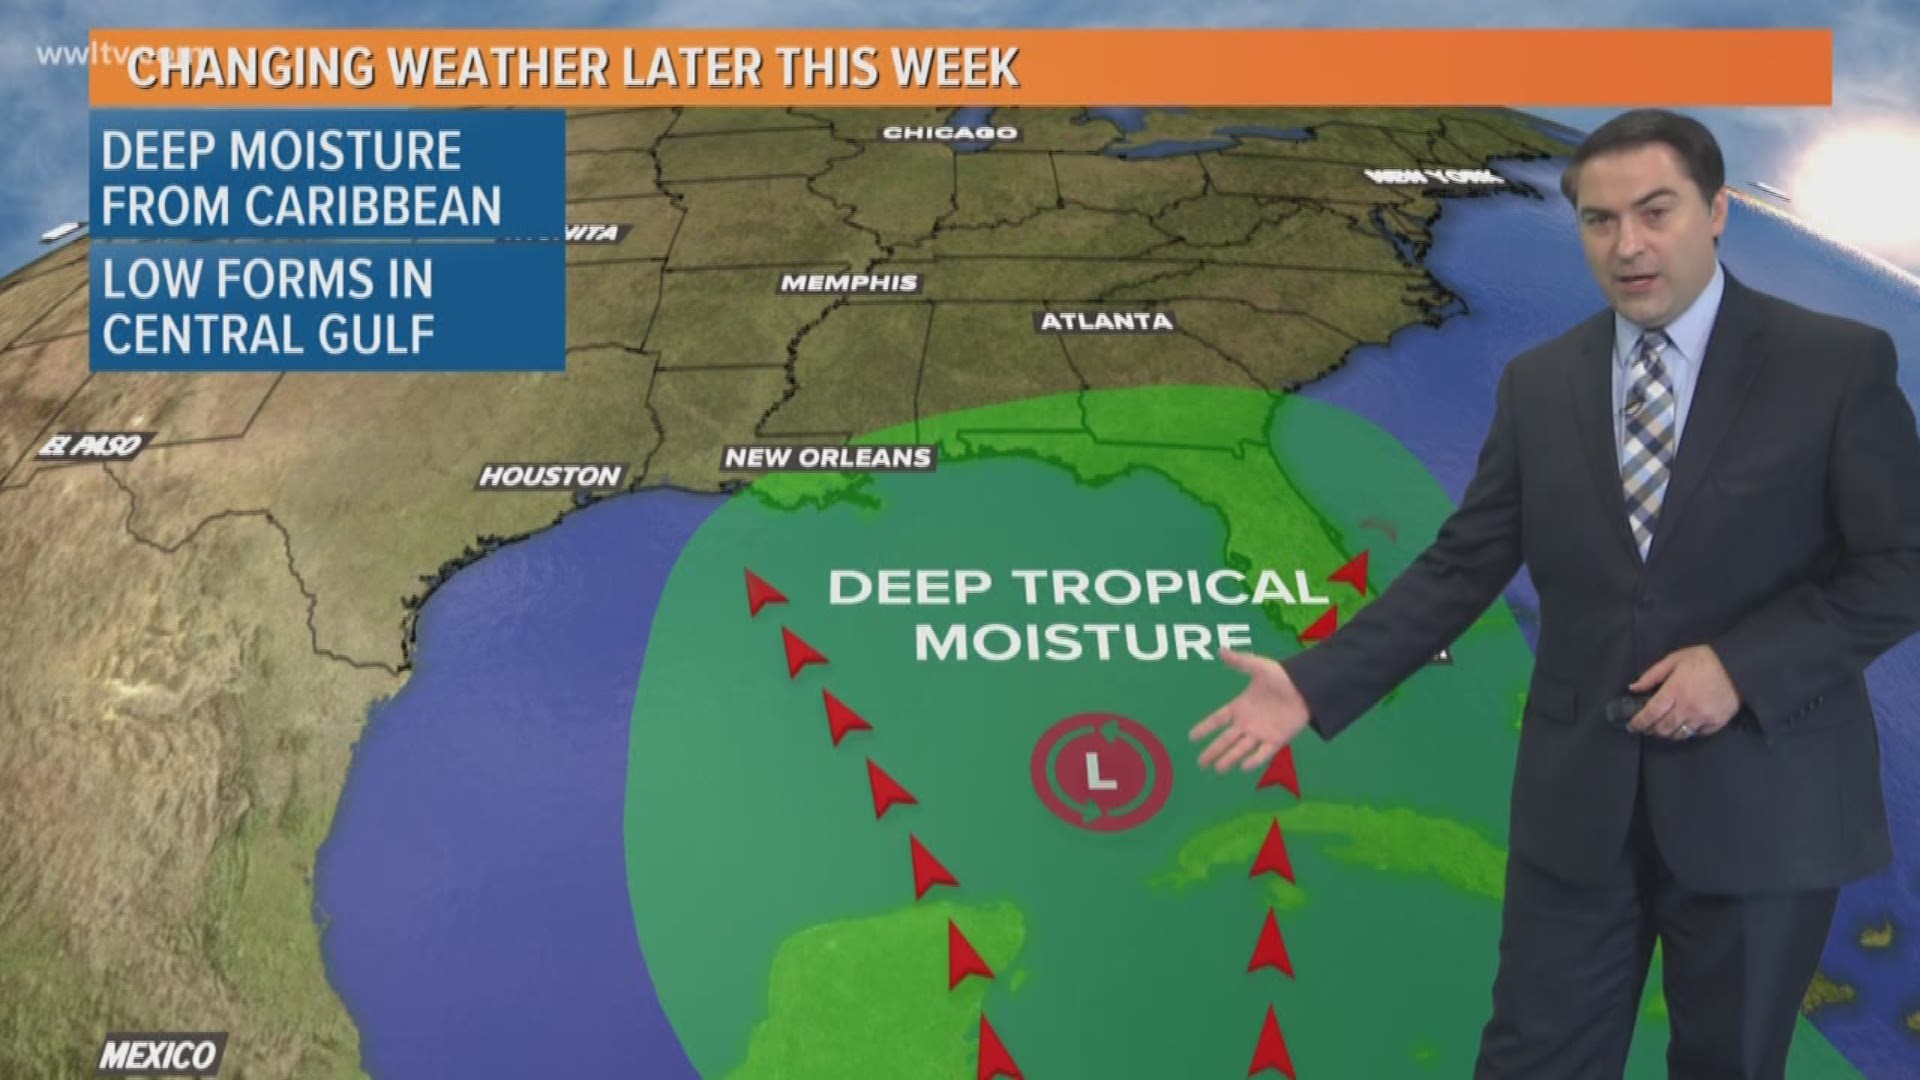 Memorial Day weekend could be very rainy or very dry, depending on the path of a tropical disturbance in the Gulf of Mexico. 